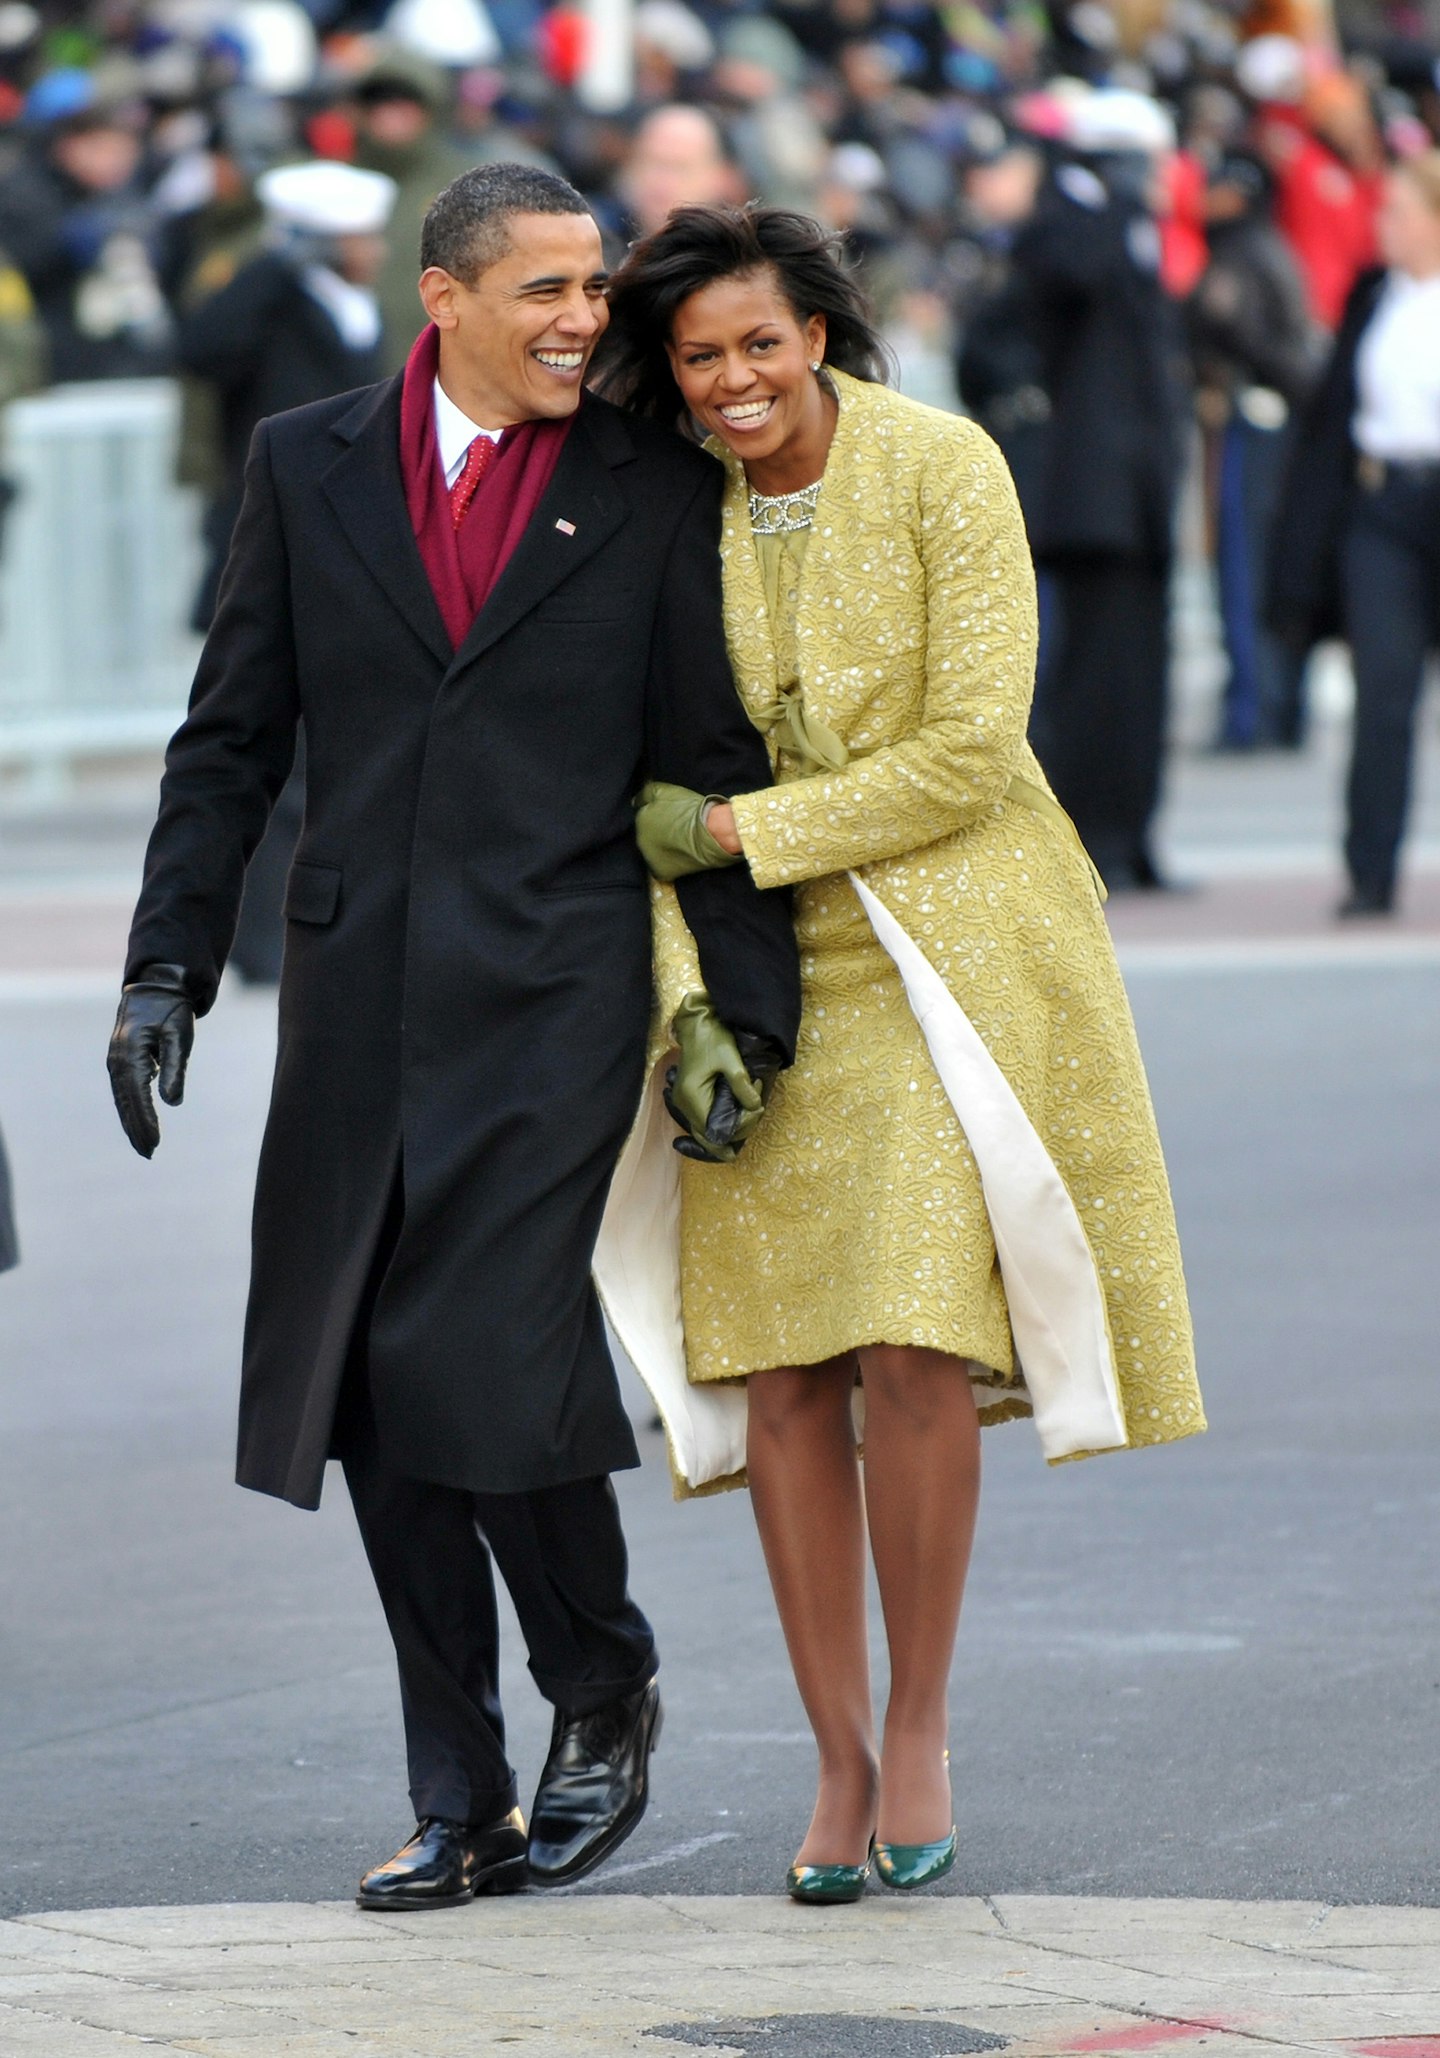 President Barack Obama and first lady Michelle Obama walk in the Inaugural Parade on January 20, 2009 in Washington, DC.